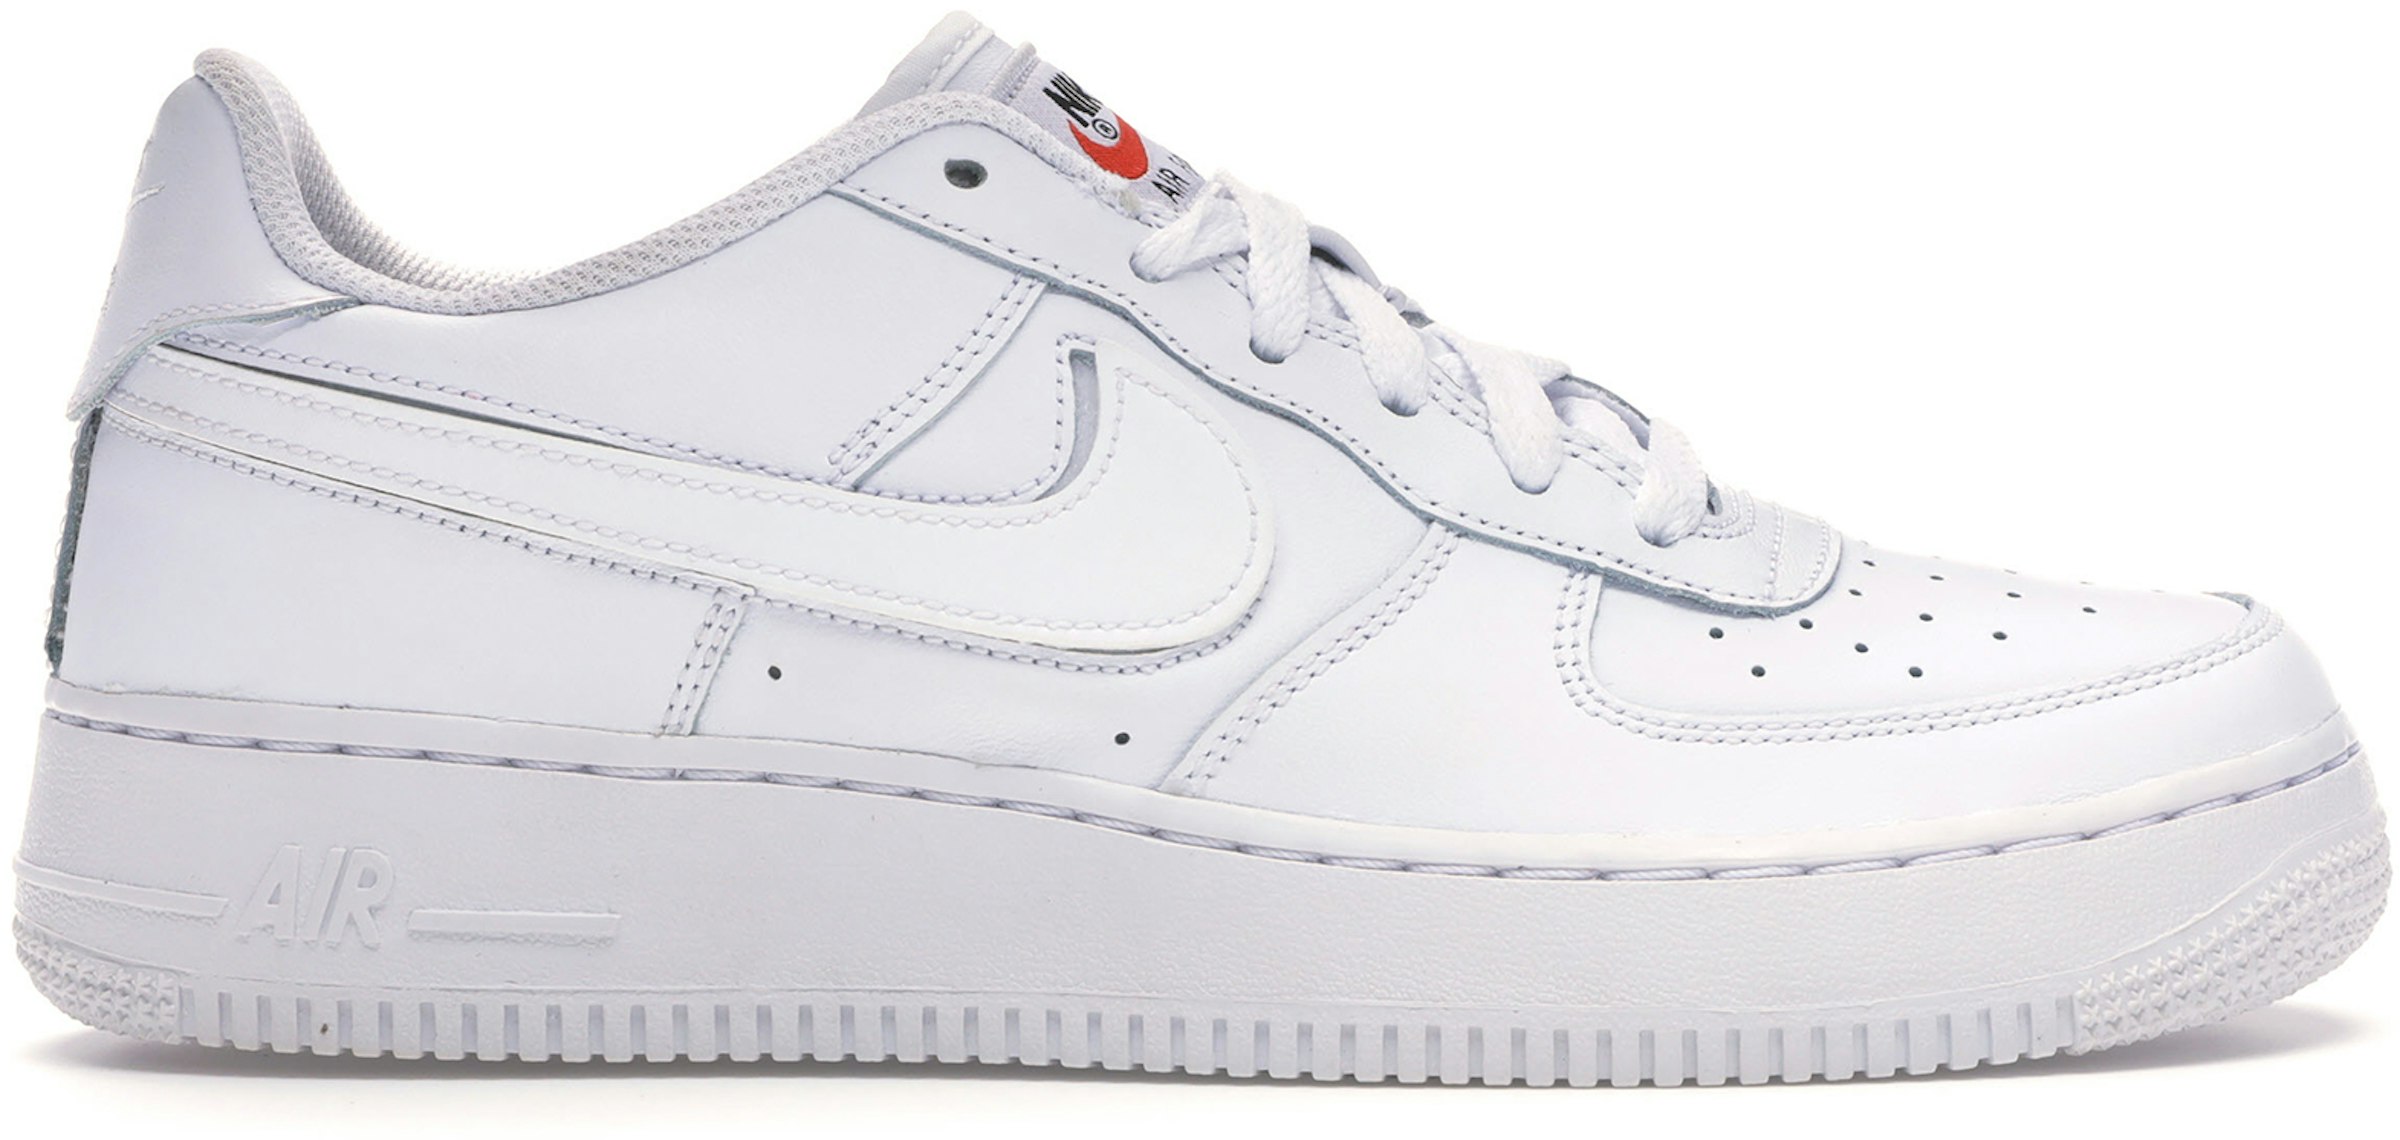 Empleado desierto Caballo Nike Air Force 1 Low Swoosh Pack All-Star White (2018) (GS) Kids' -  AQ9942-100 - US